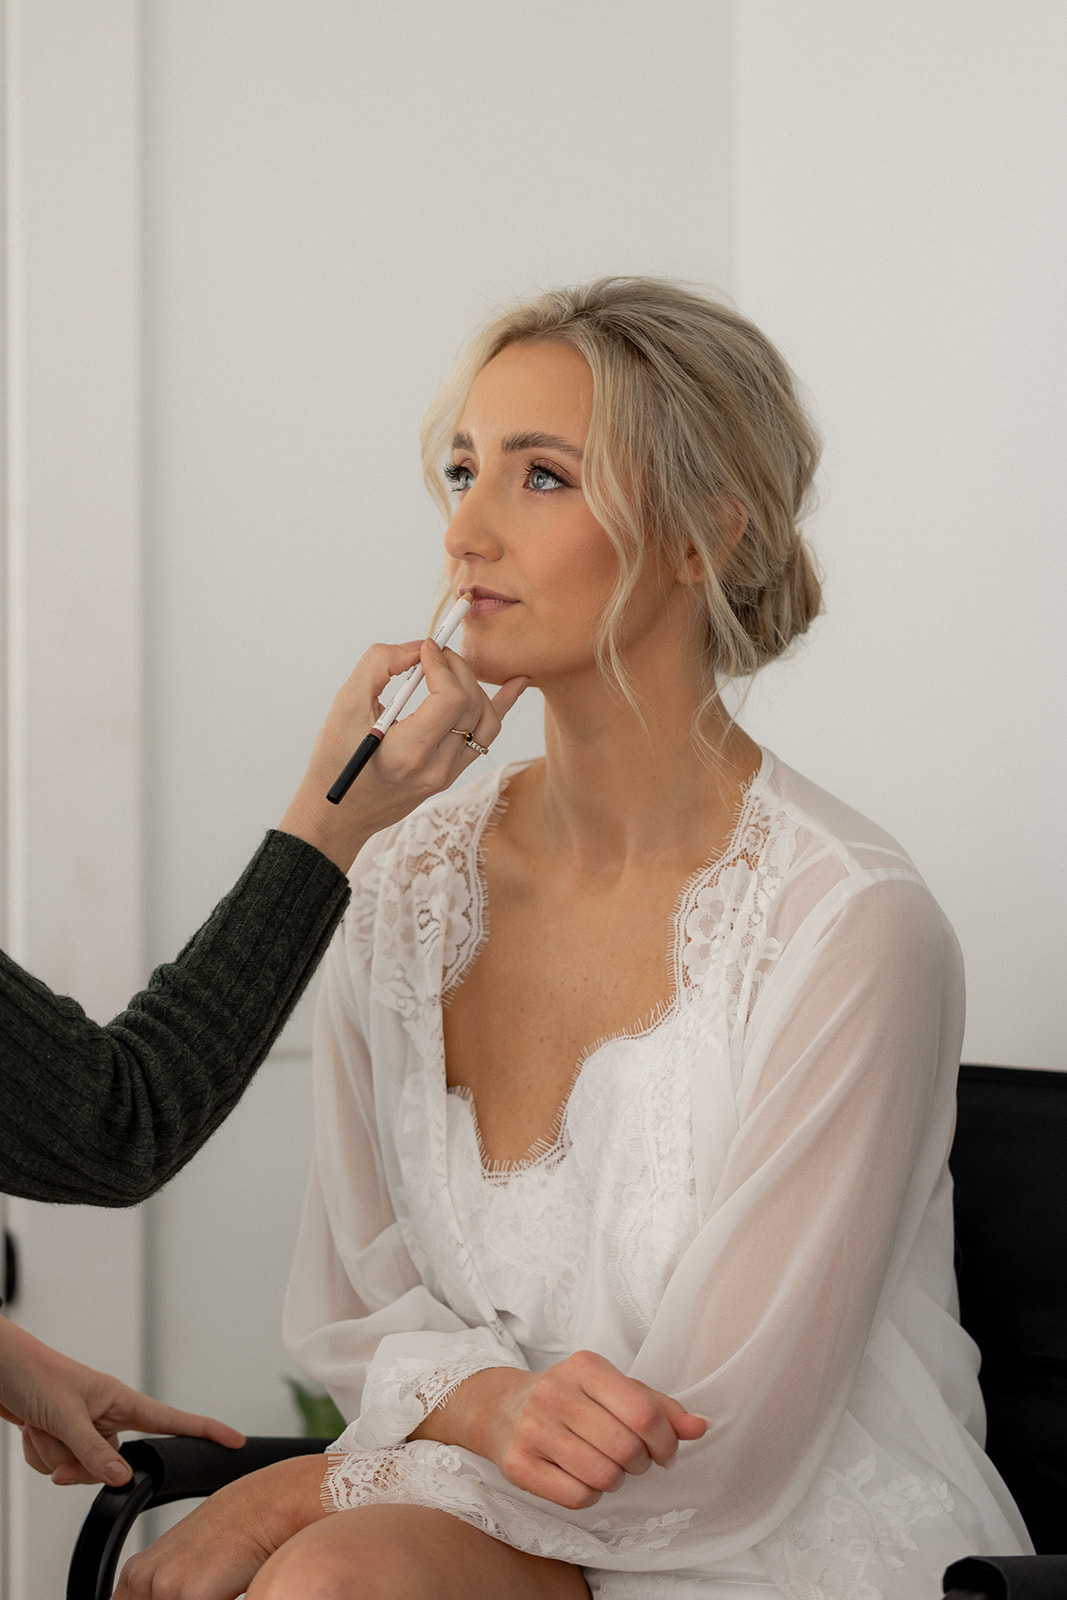 Bride getting ready for wedding. Sitting on chair in white robe while lipstik is applied